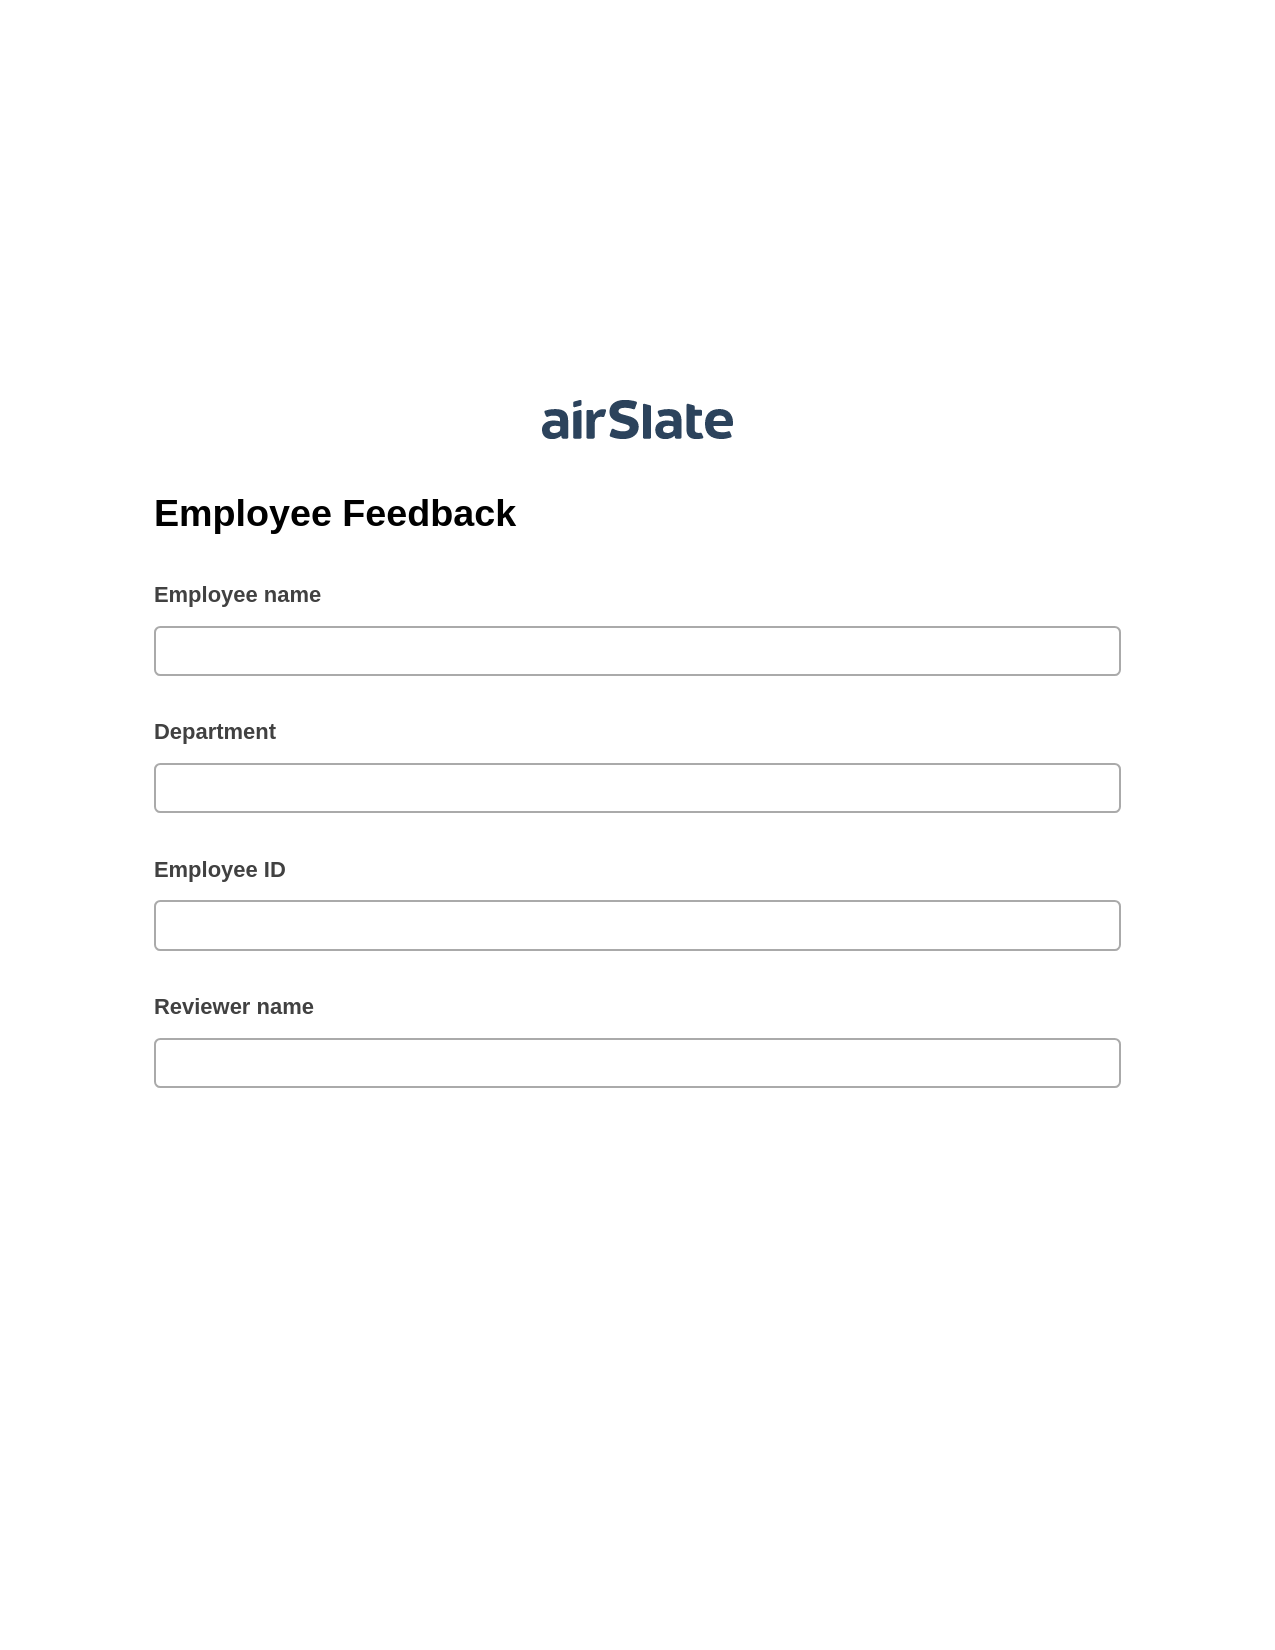 Employee Feedback Pre-fill Dropdown from Airtable, Update MS Dynamics 365 Record Bot, Box Bot